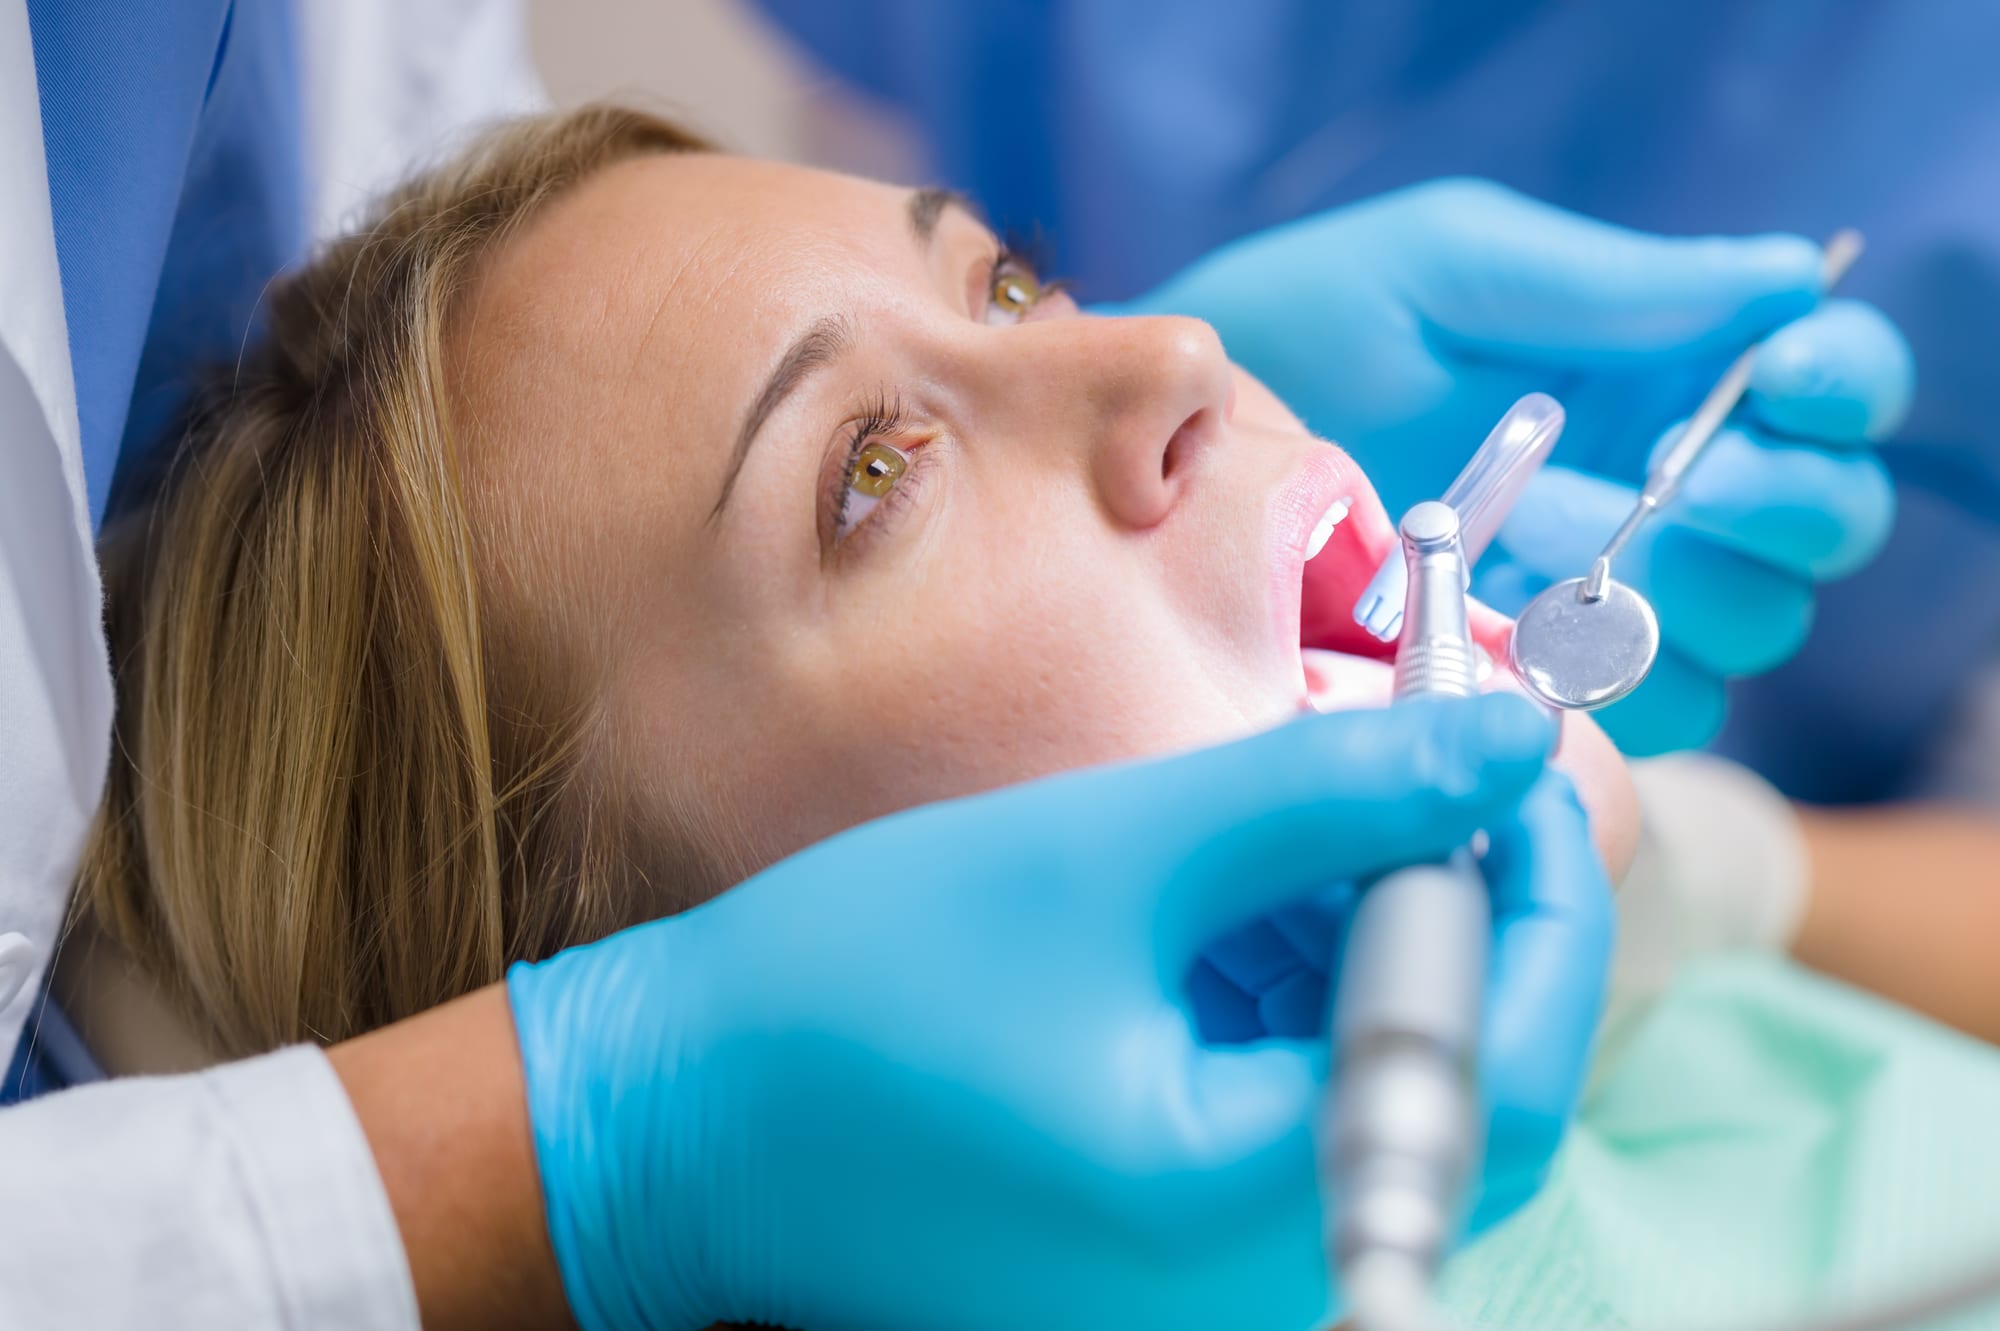 Tooth Extraction Explained: Why You Need It & How It’s Done